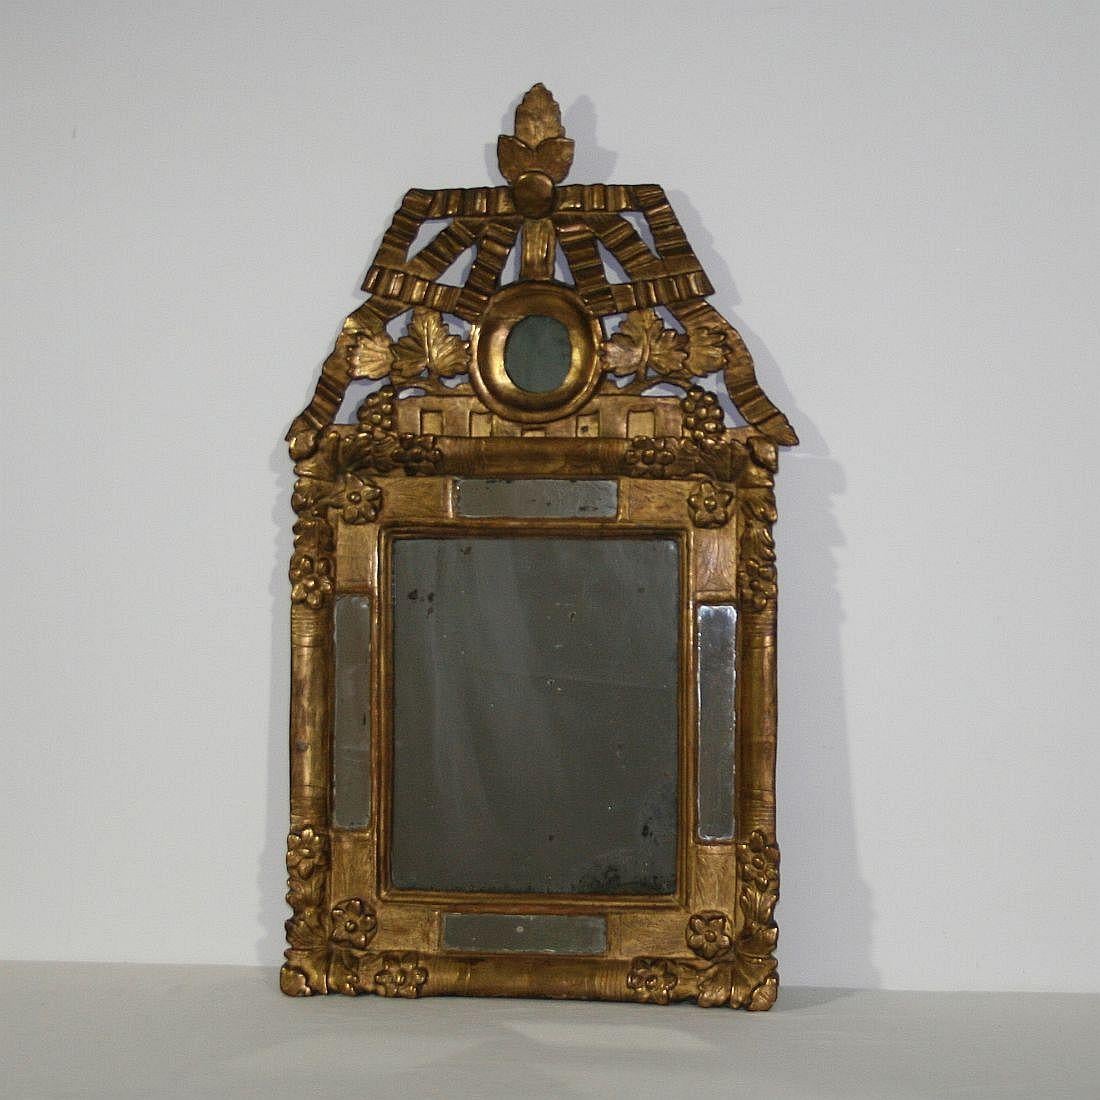 Stunning period piece with original color, gilding and mirror glass, France, circa 1700-1750. Weathered, small losses and old repairs at the small cracks in the crest.